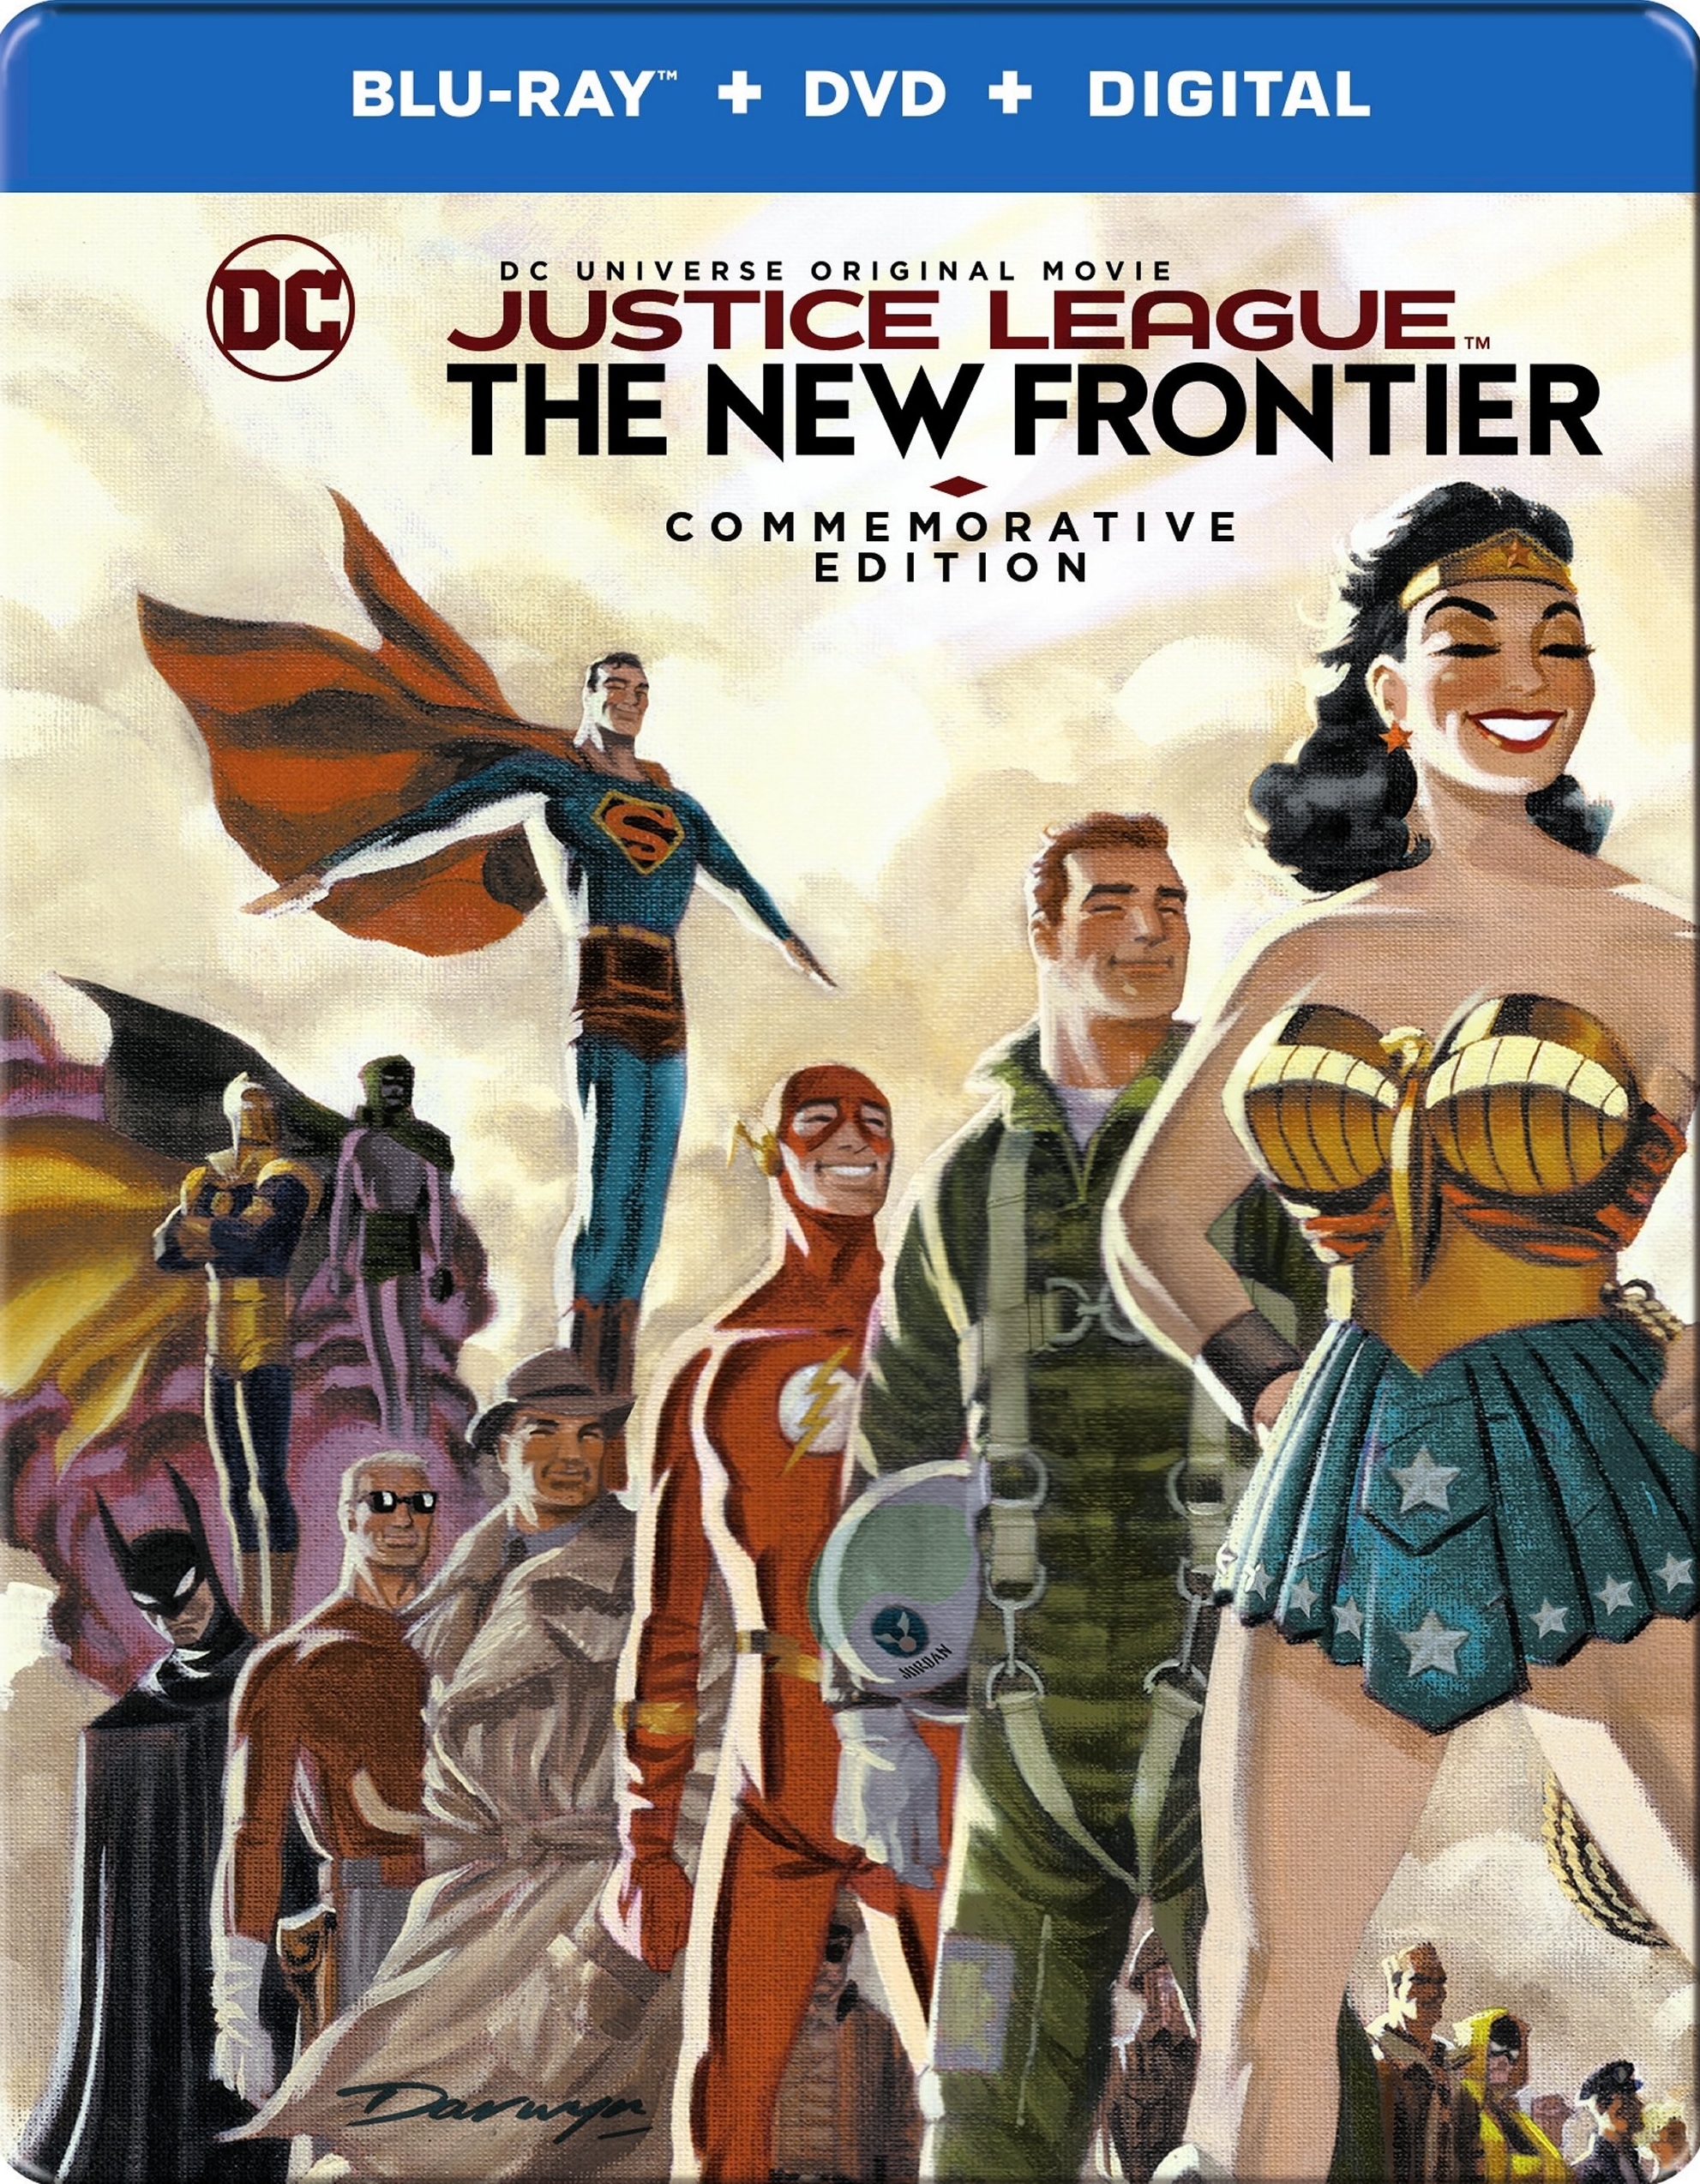 Justice League The New Frontier Commemorative Edition Steelbook Blu Ray 08 Best Buy